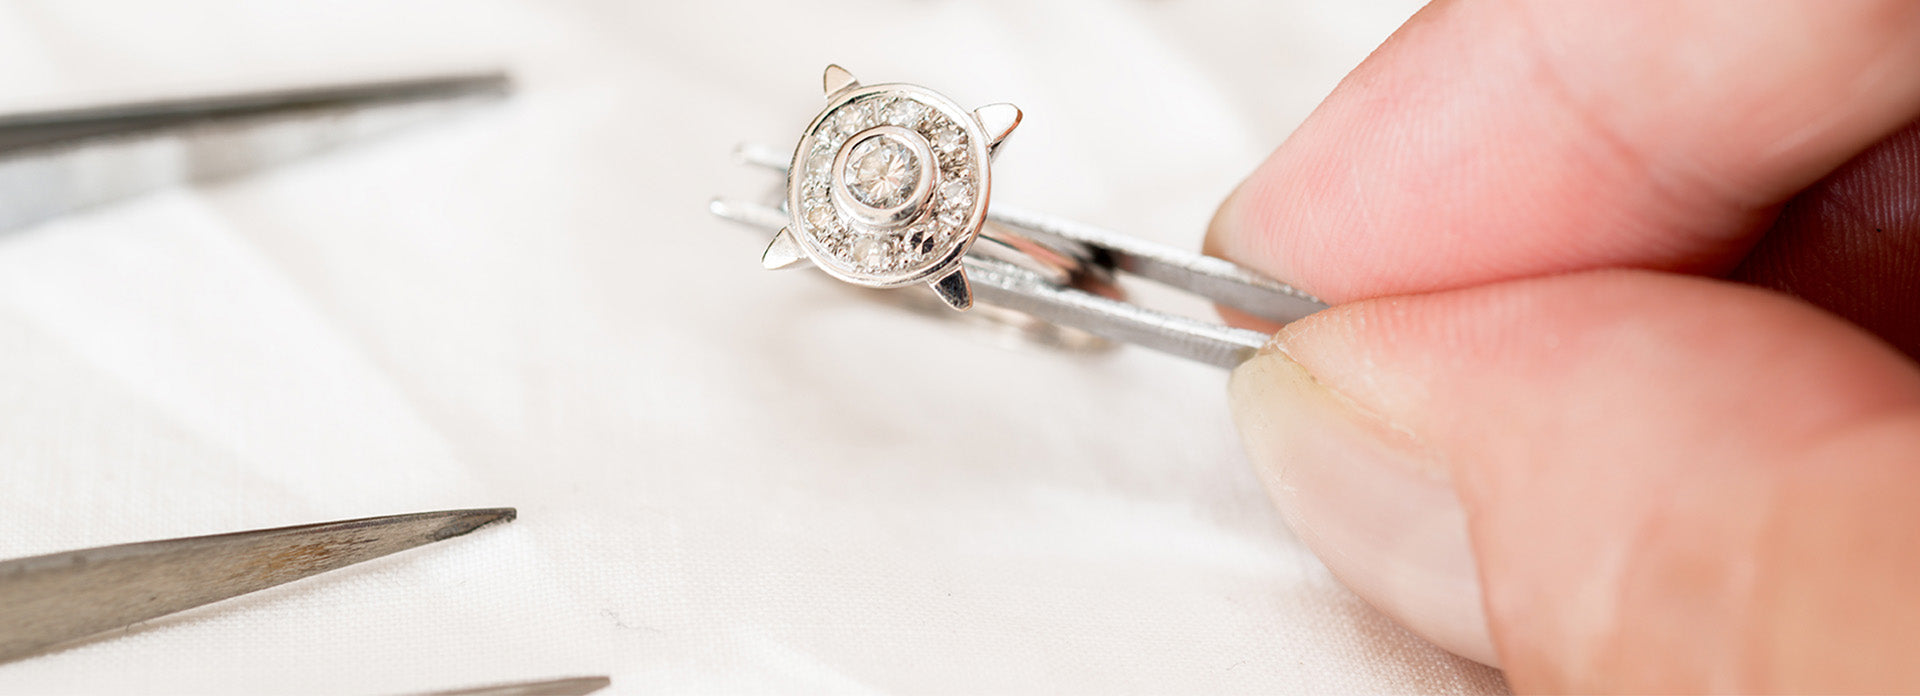 Benchmark, Efficient ring size measure for Jewellers 